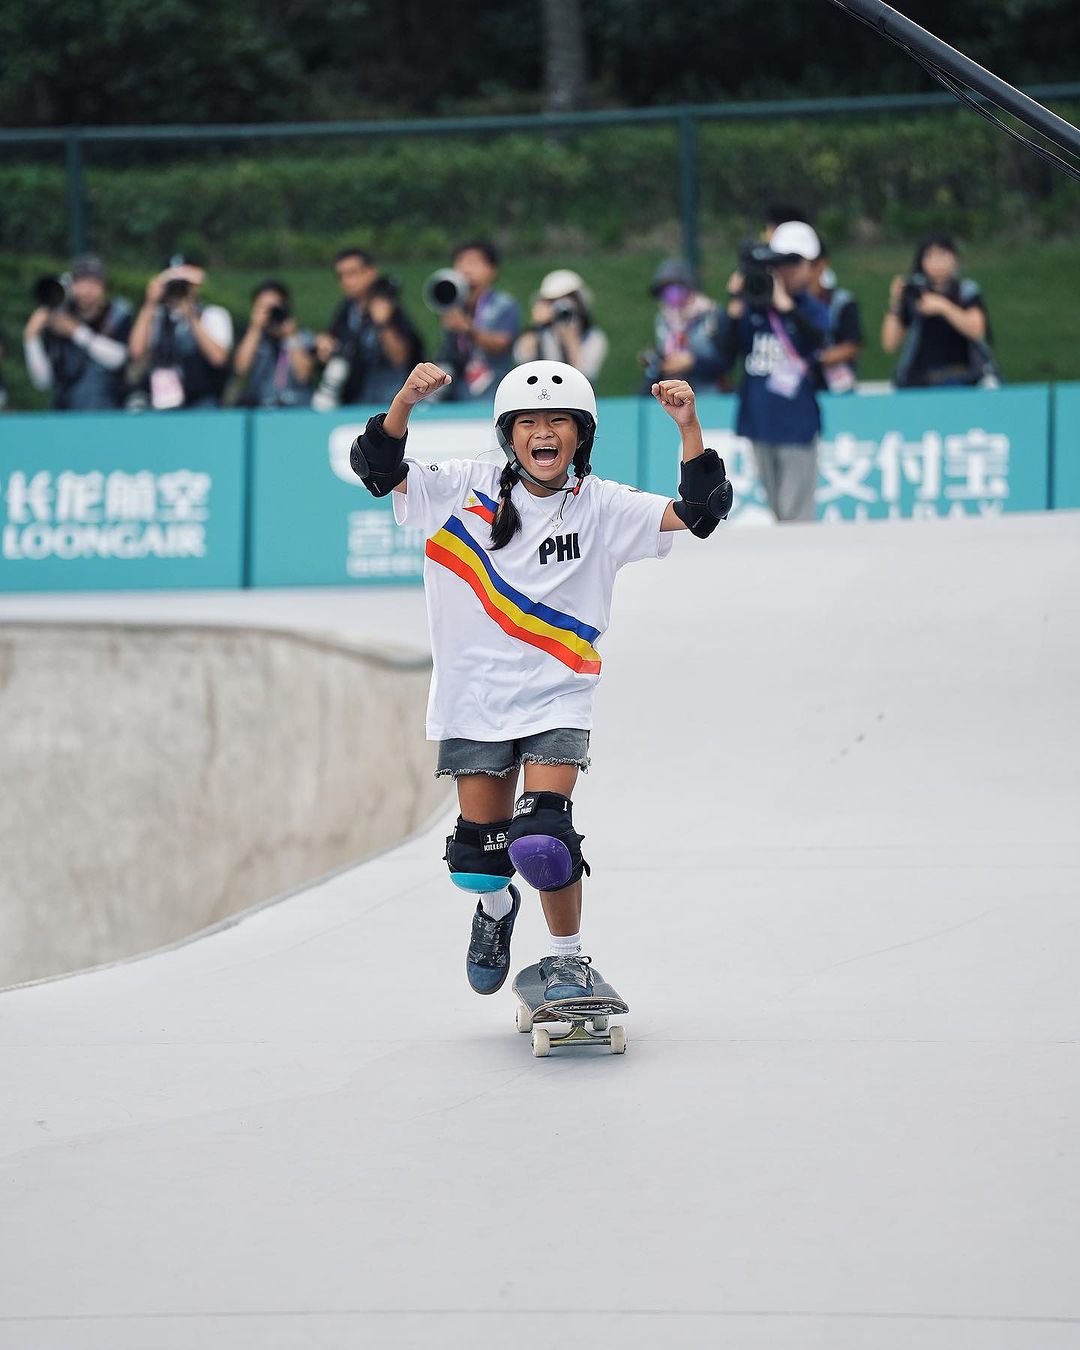 Mazel Alegado, the youngest athlete on Team Philippines at the 19th Asian Games